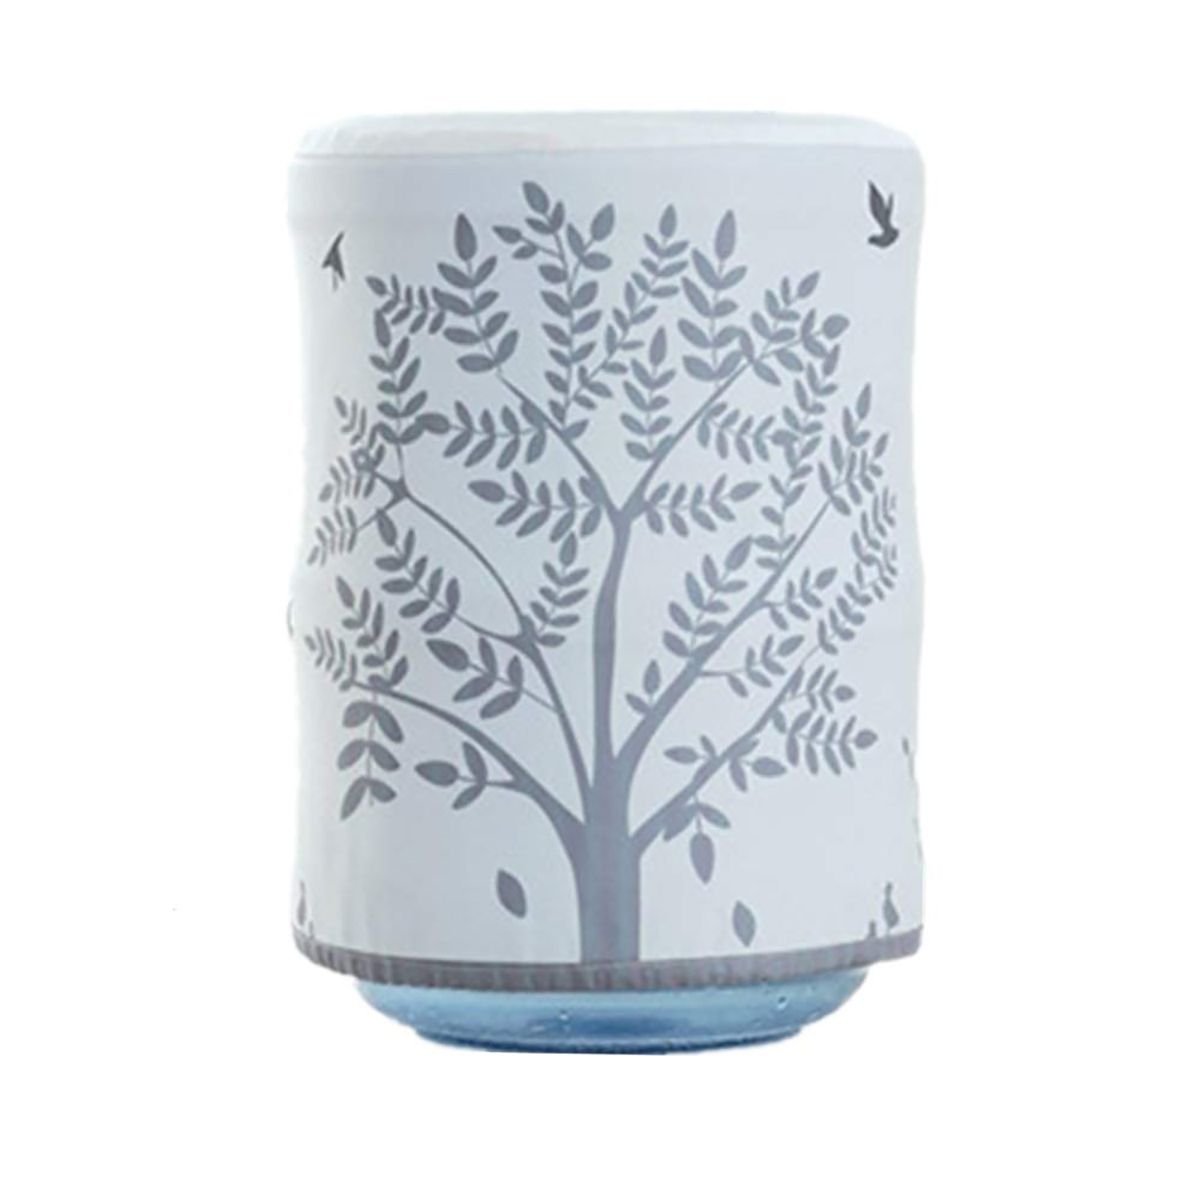 Water-Dispenser-Bucket-Cover-Barrel-Dustproof-Protect-Case-Home-Office-Decorations-1553282